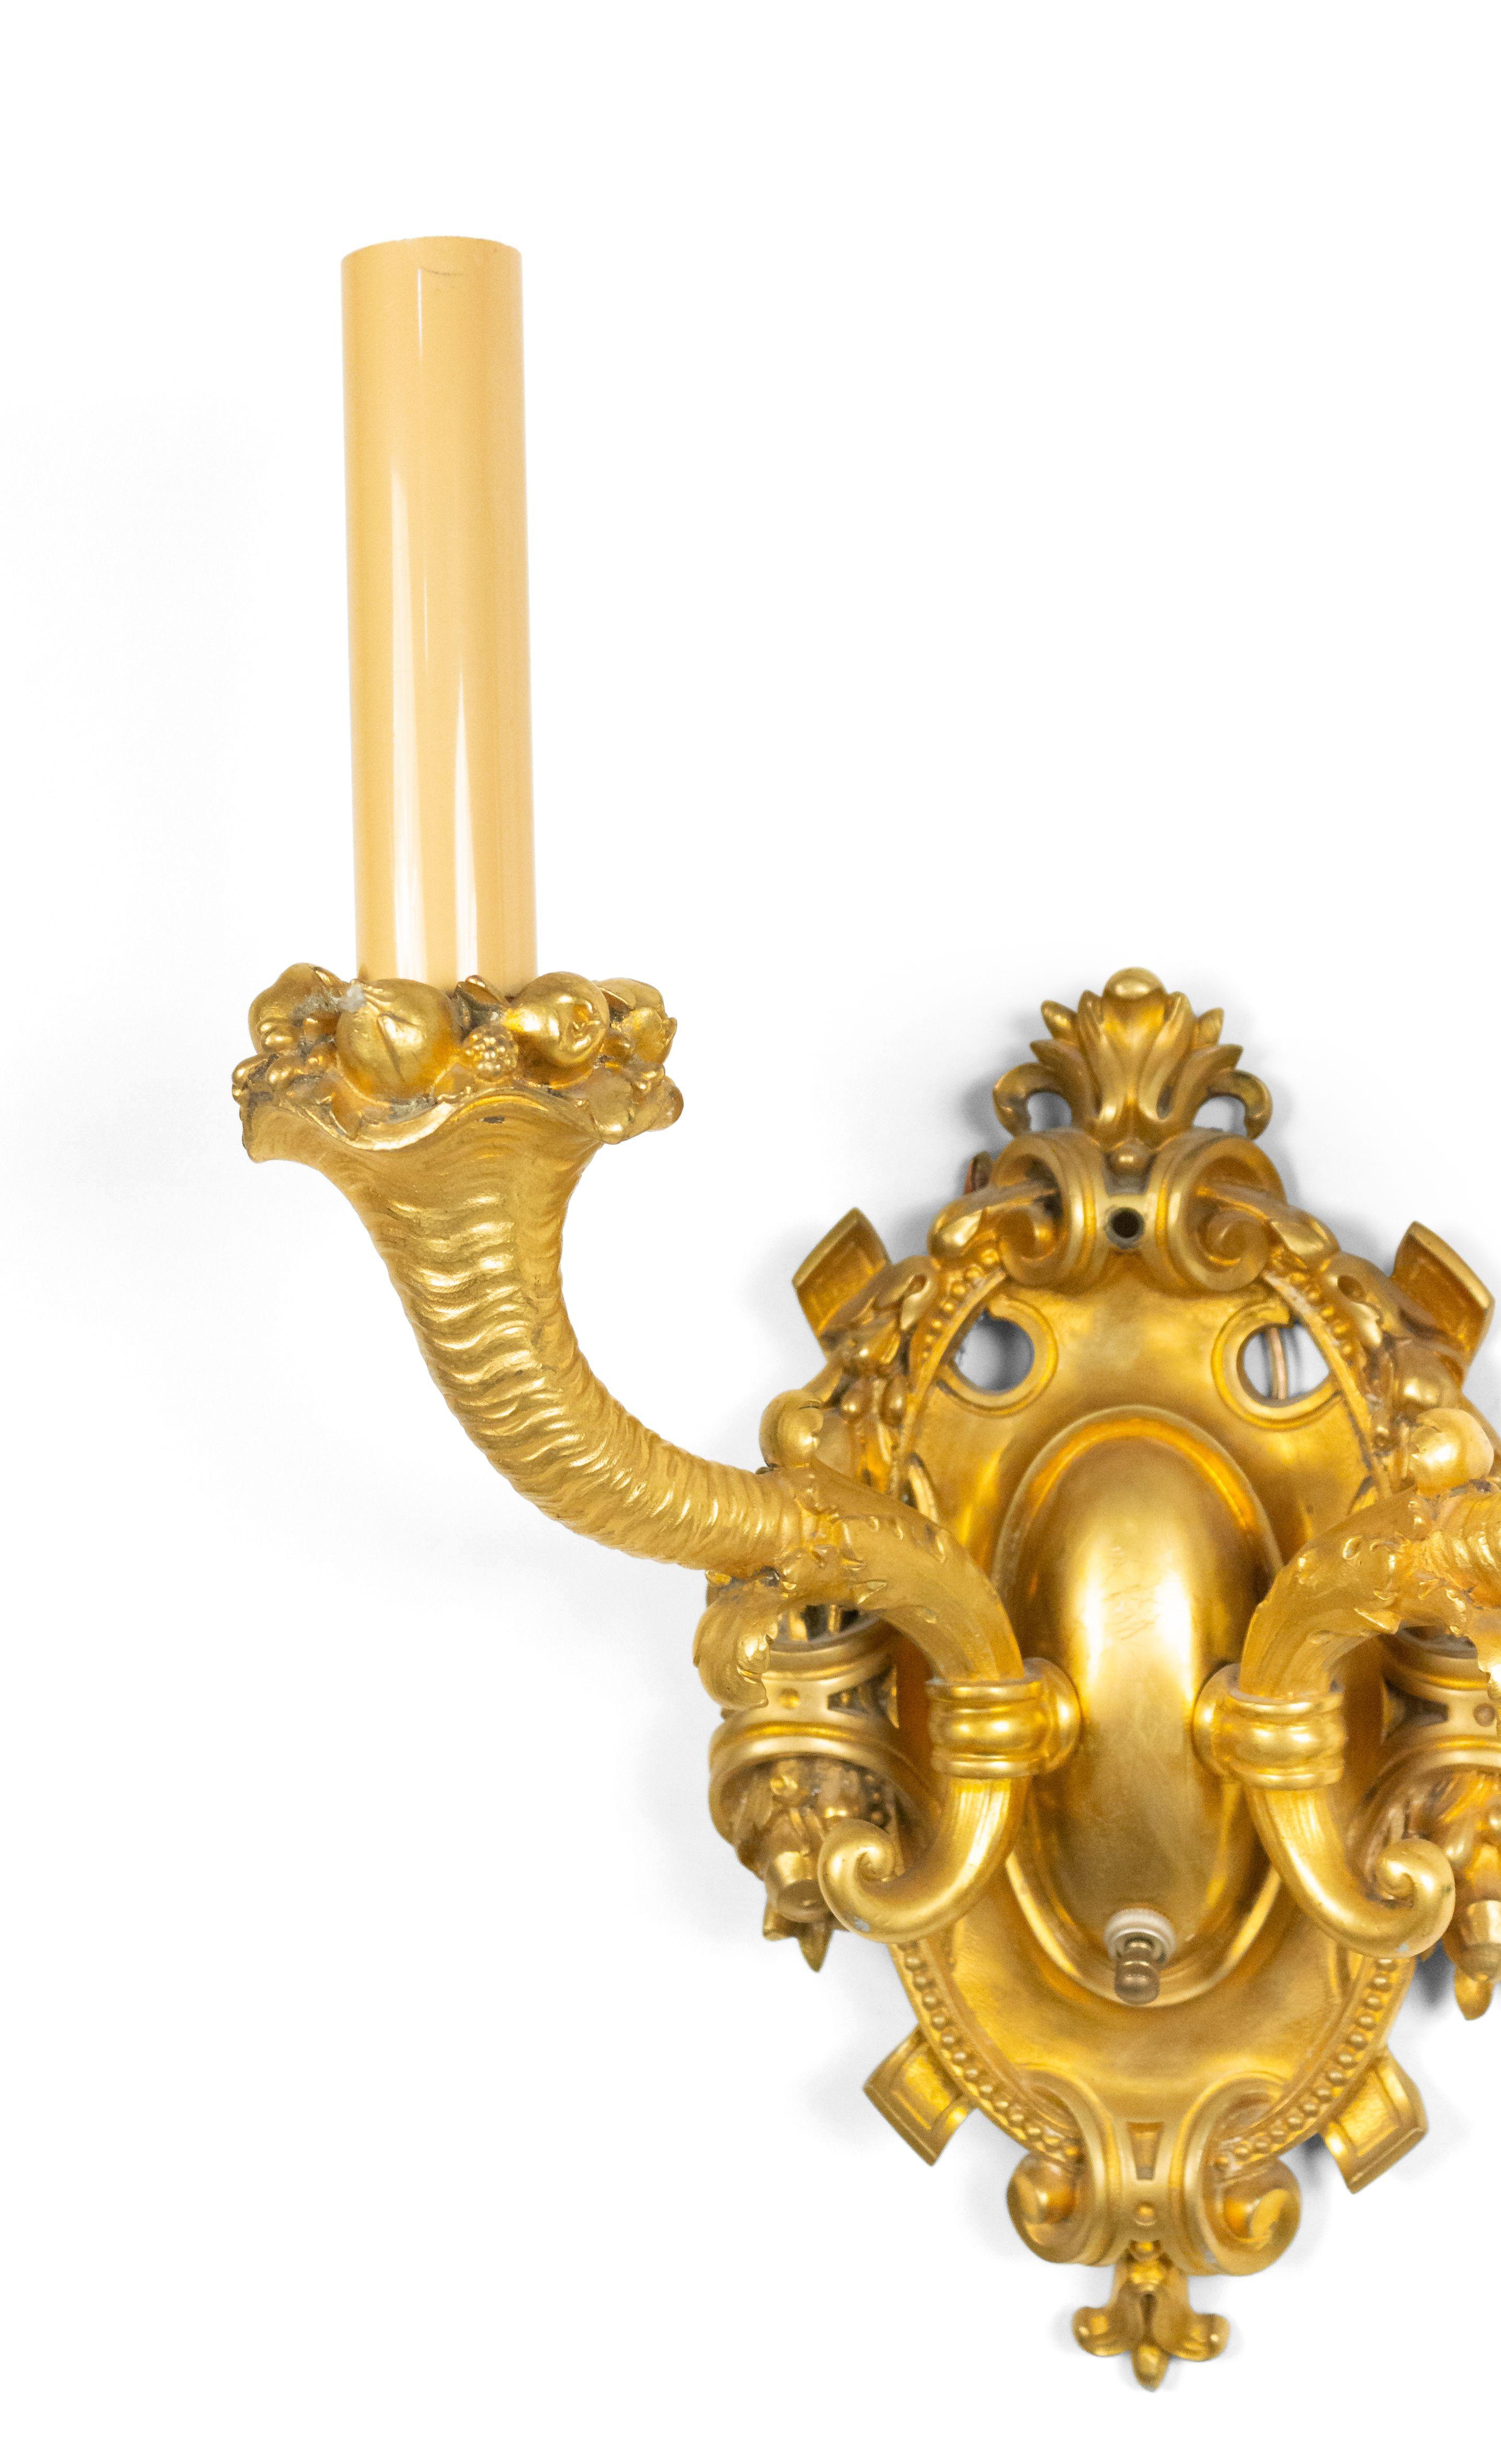 French Victorian-style (19/20th Century) bronze dore wall sconce with two arms, a cornucopia motif, and an oval scroll design backplate.
